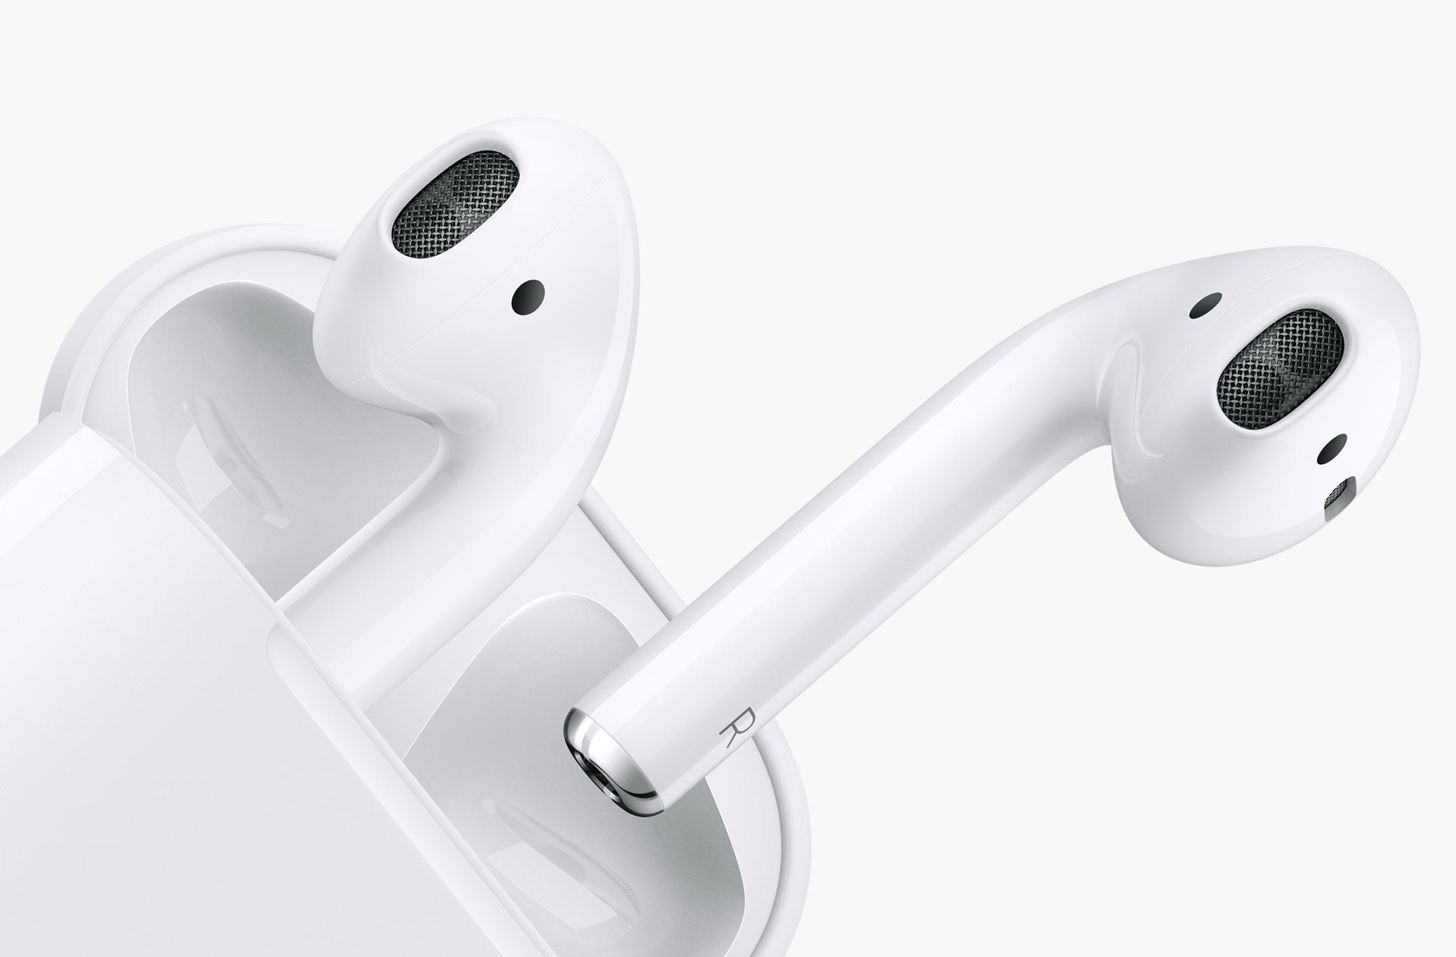 Apple AirPods Deals for Black Friday Going on Right Now & Coming Up